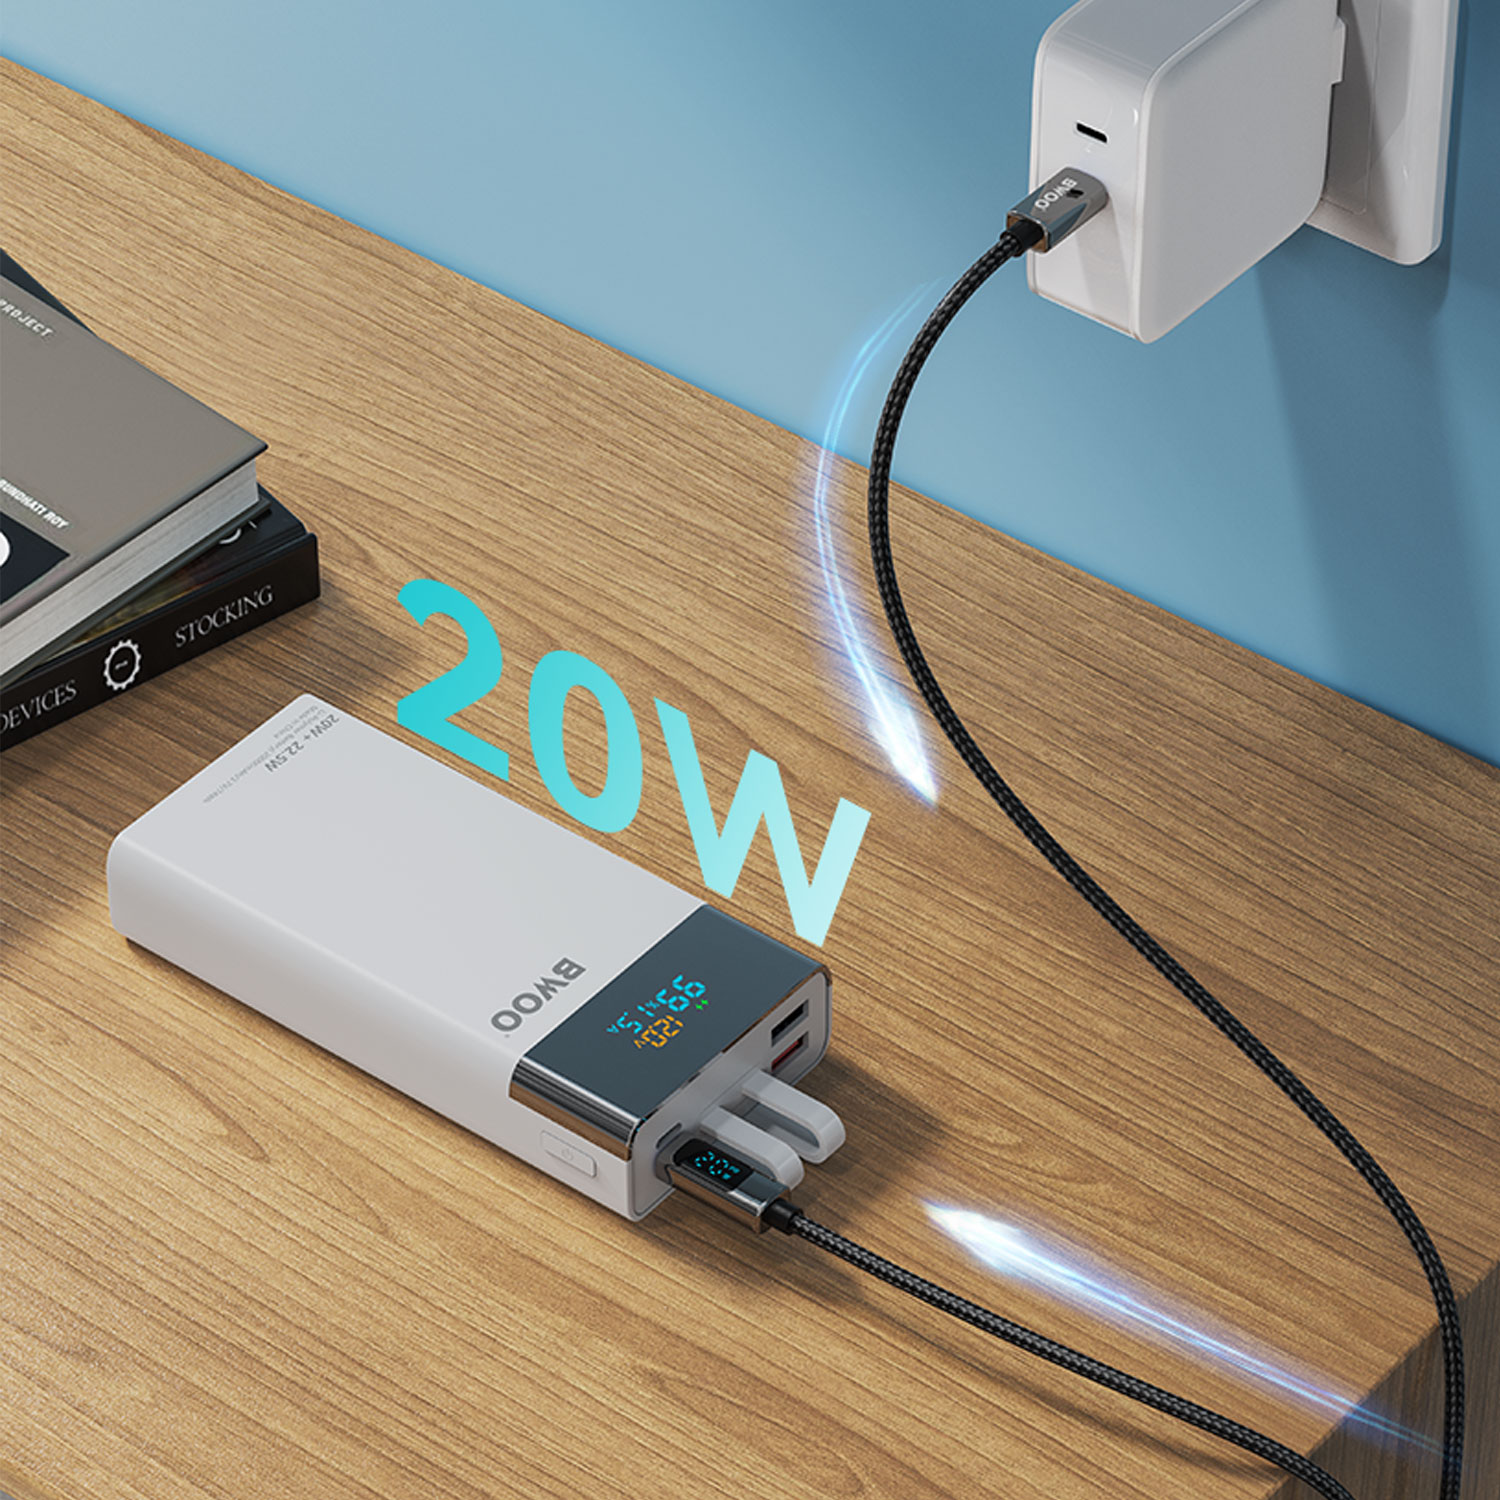 max 22.5W fast charging power bank